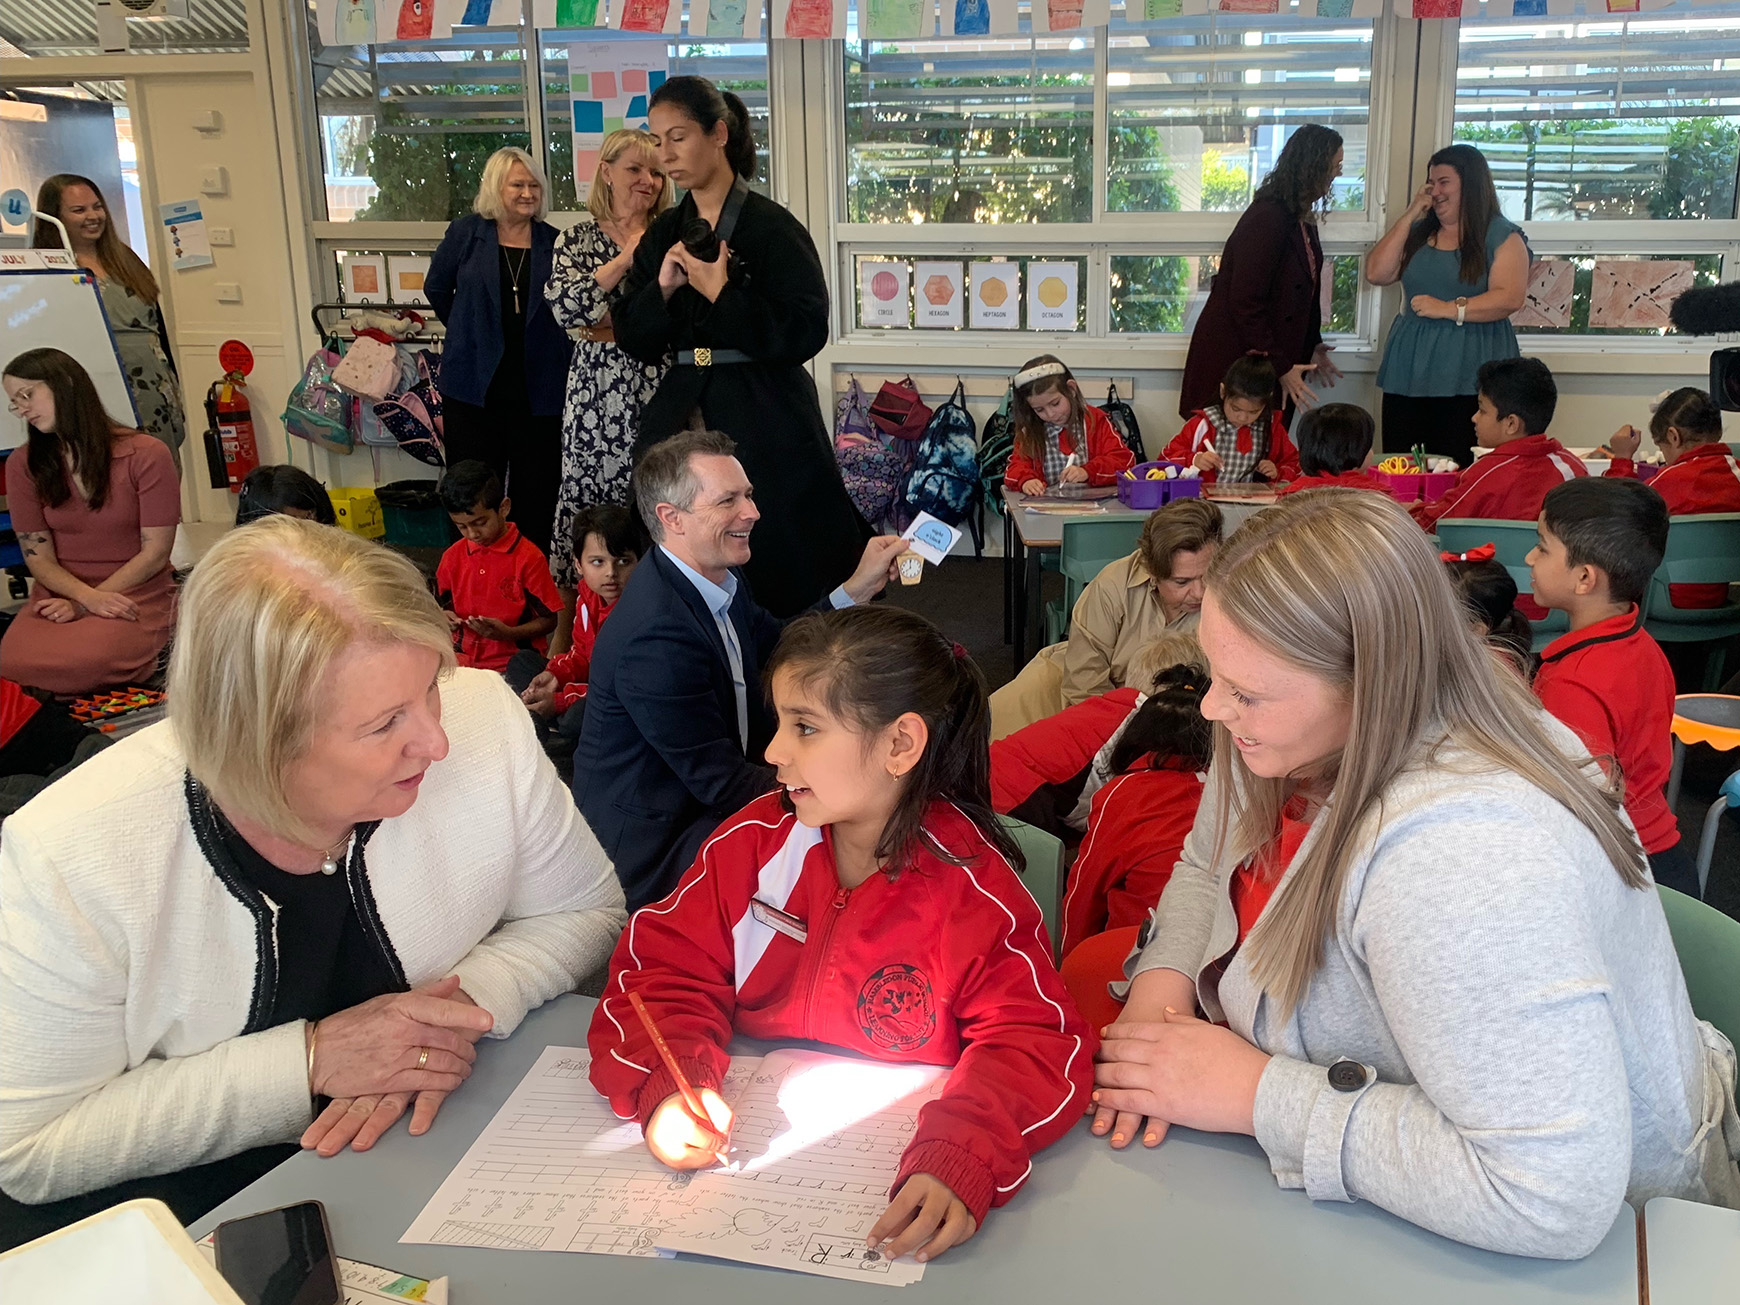 On the left a woman wearing a white jacket is talking to a primary school girl wearing a red uniform. On the right is a woman wearing a gray jacket. They are seated at a desk in a school classroom, there are other people and students working behind the. 